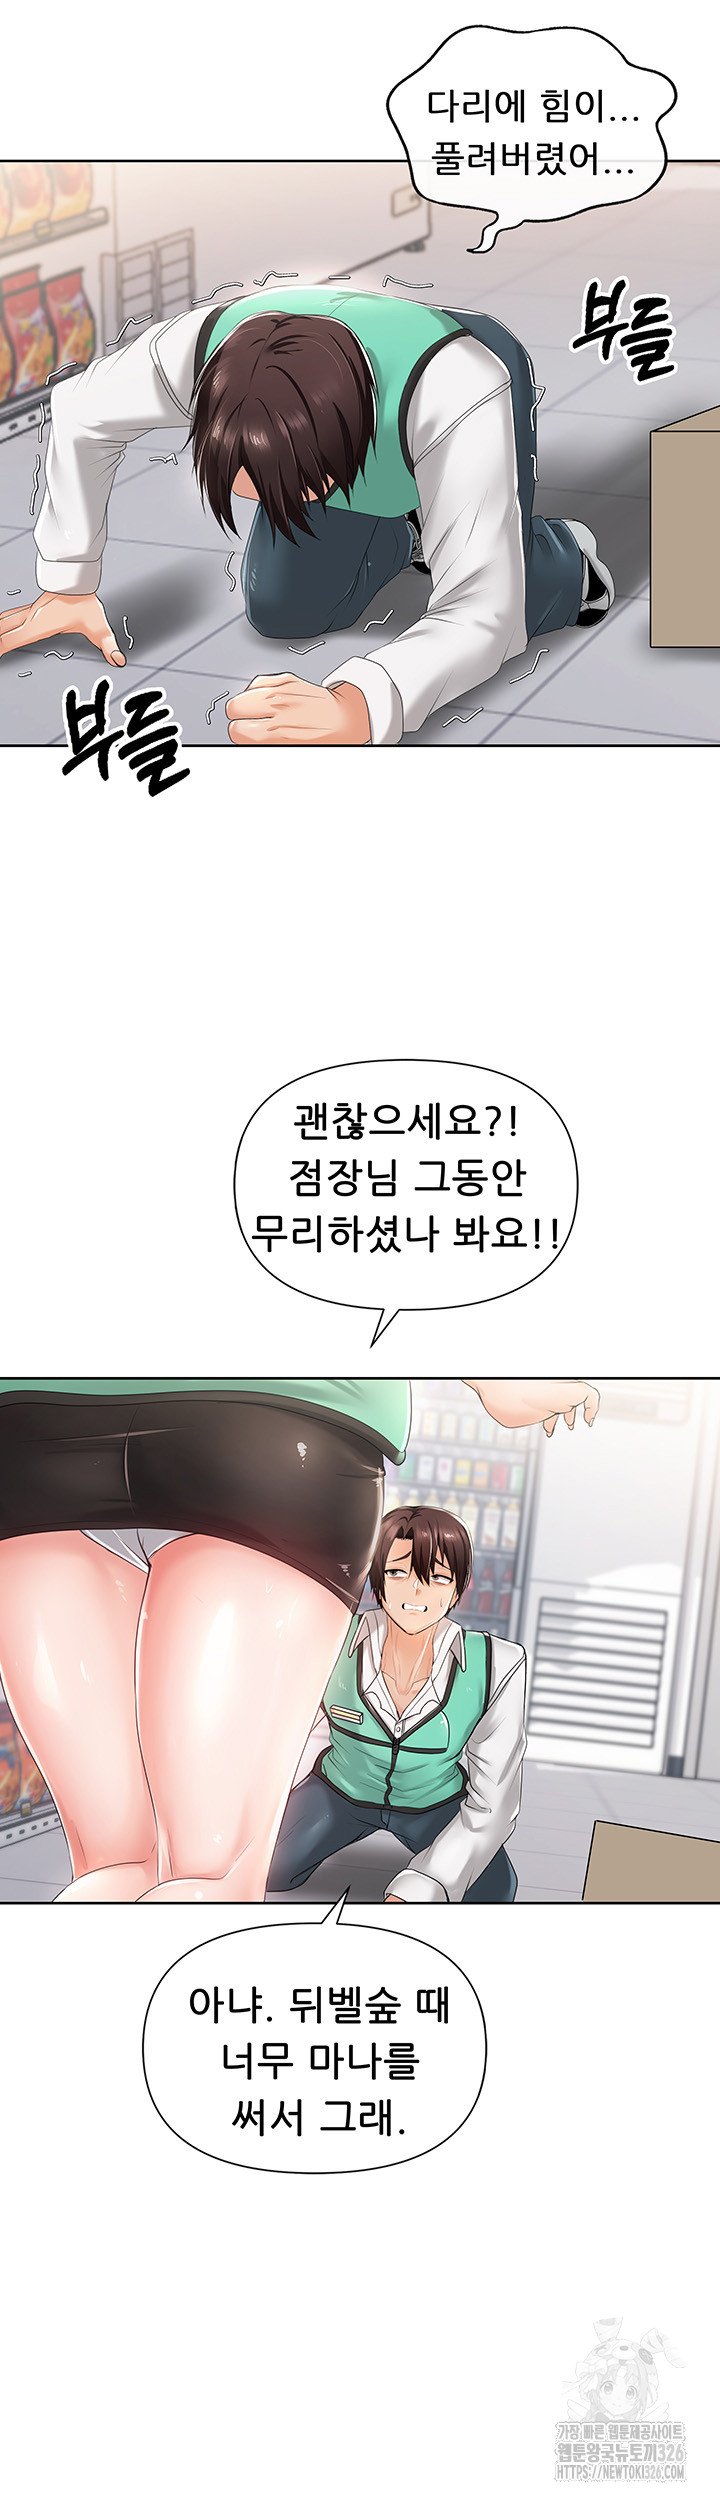 welcome-to-the-isekai-convenience-store-raw-chap-8-20